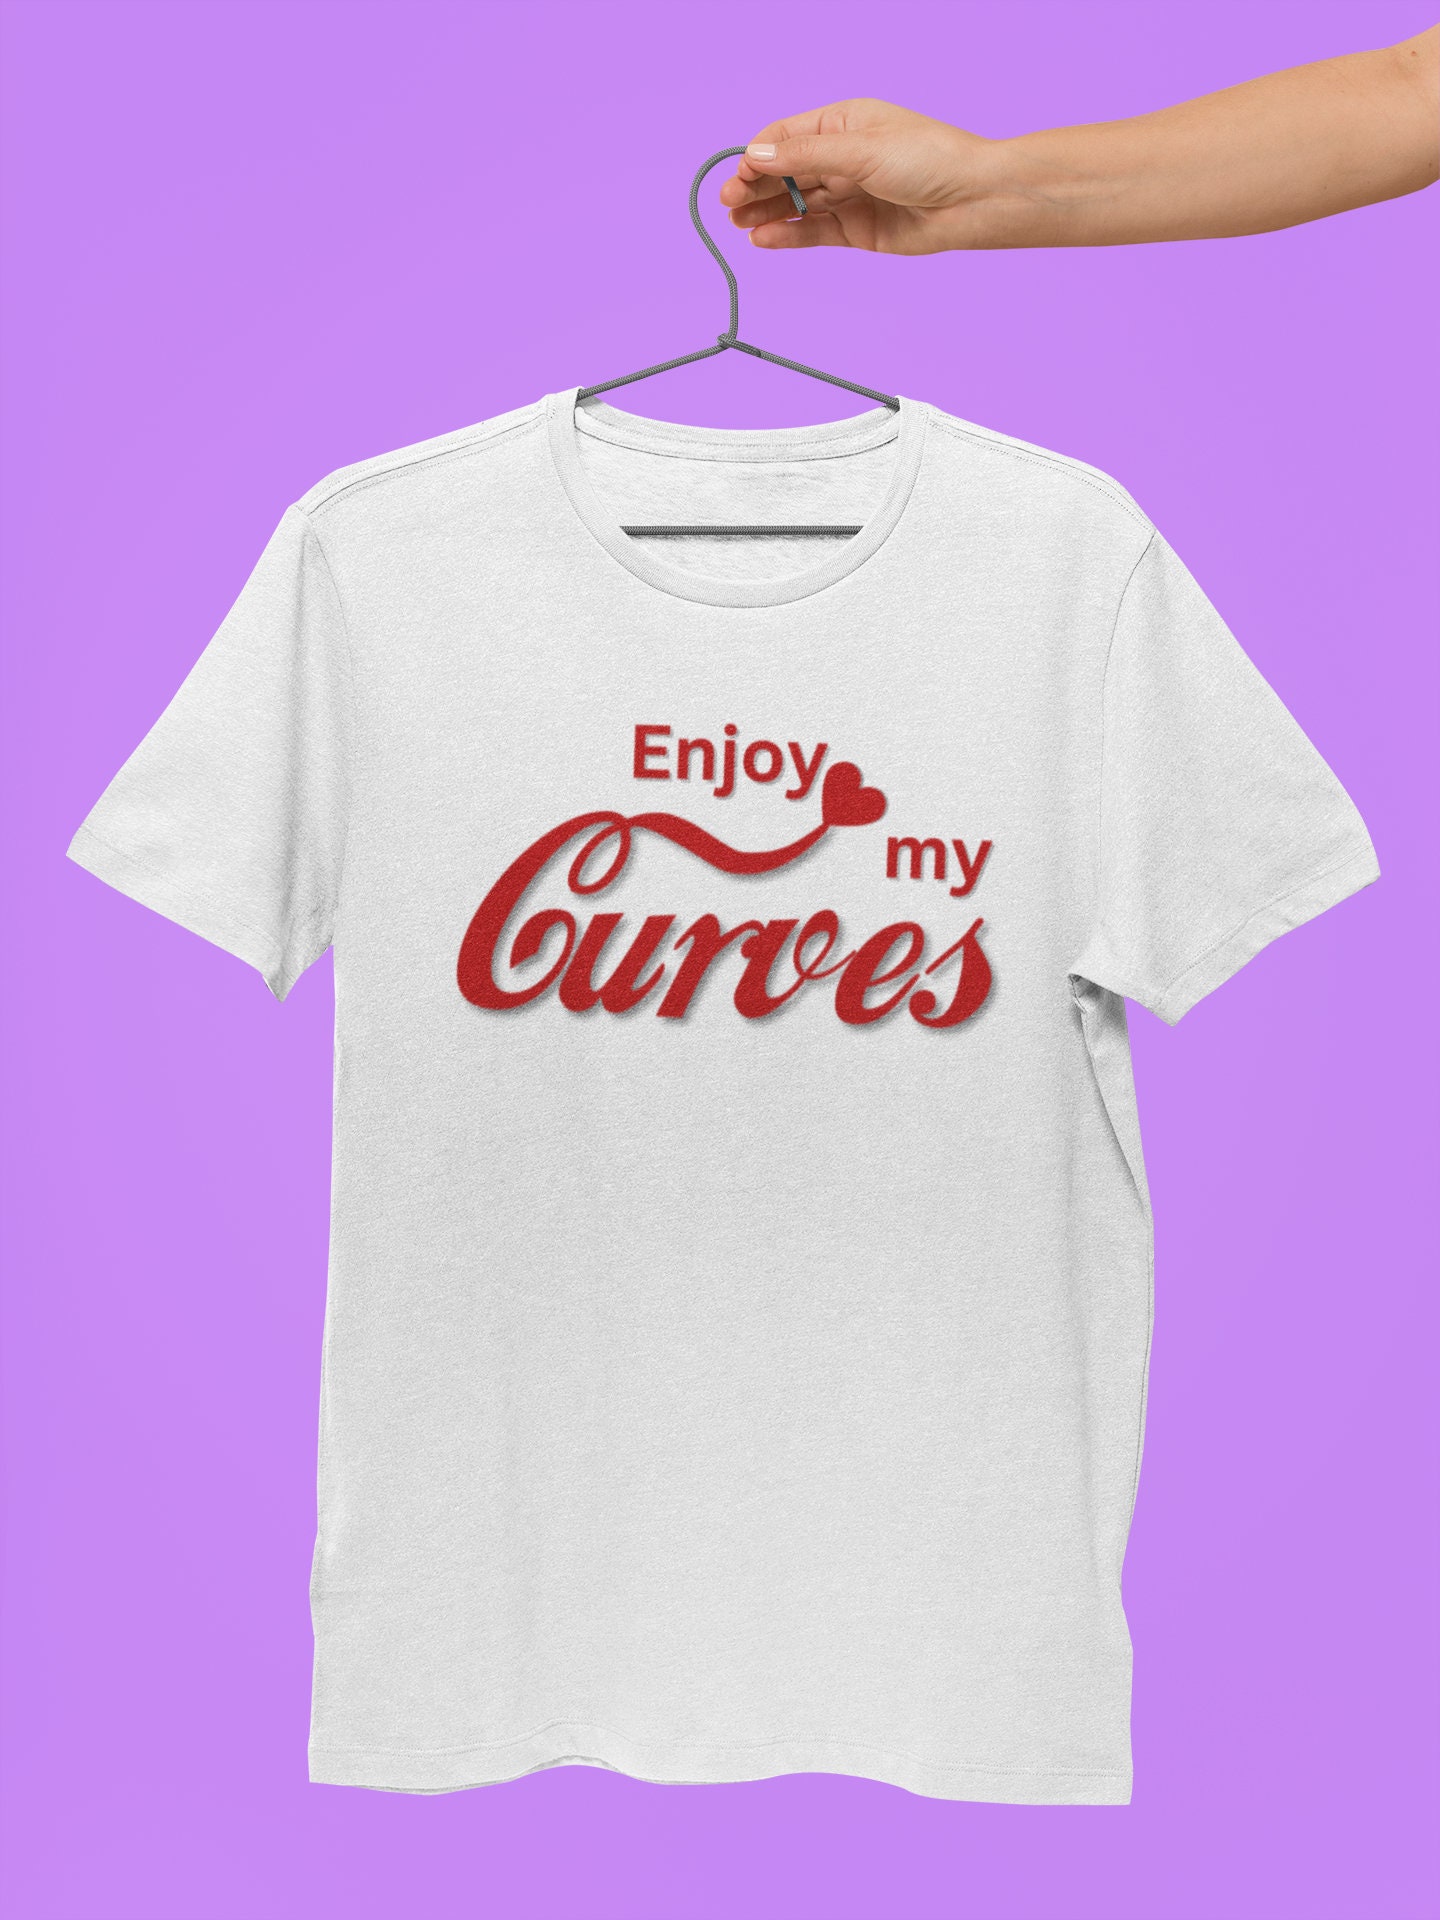 EXPRESS DELIVERY Embrace Your Curves Enjoy My Curves Soft Cotton Tee,  Confidence in Comfort Jersey Shirt, Look Attractive With Our Shirt -   Canada